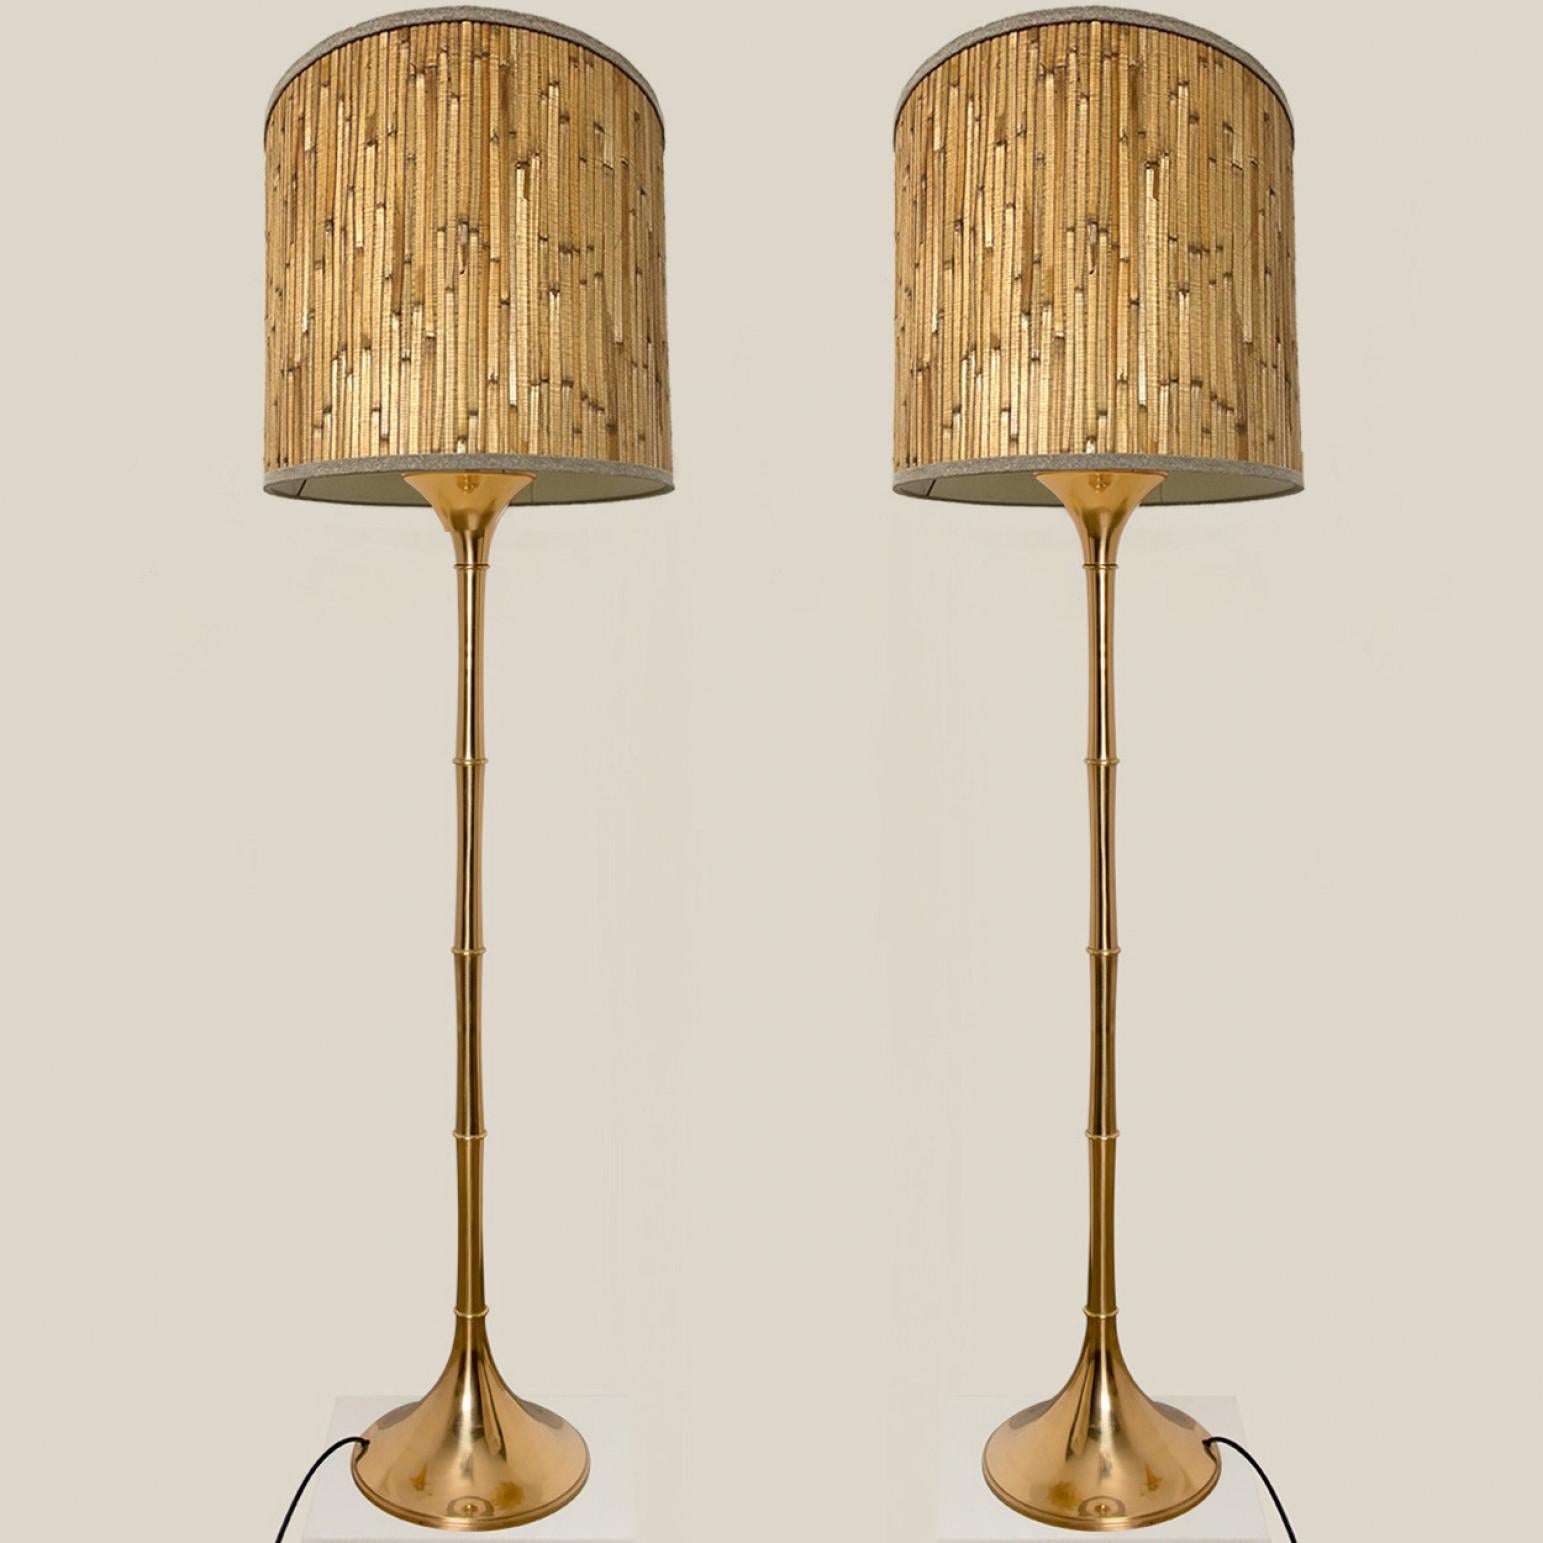 Pair of Floor Lamps Gold Brass and Bamoboo Shade by Ingo Maurer, Germany, 1968 For Sale 8